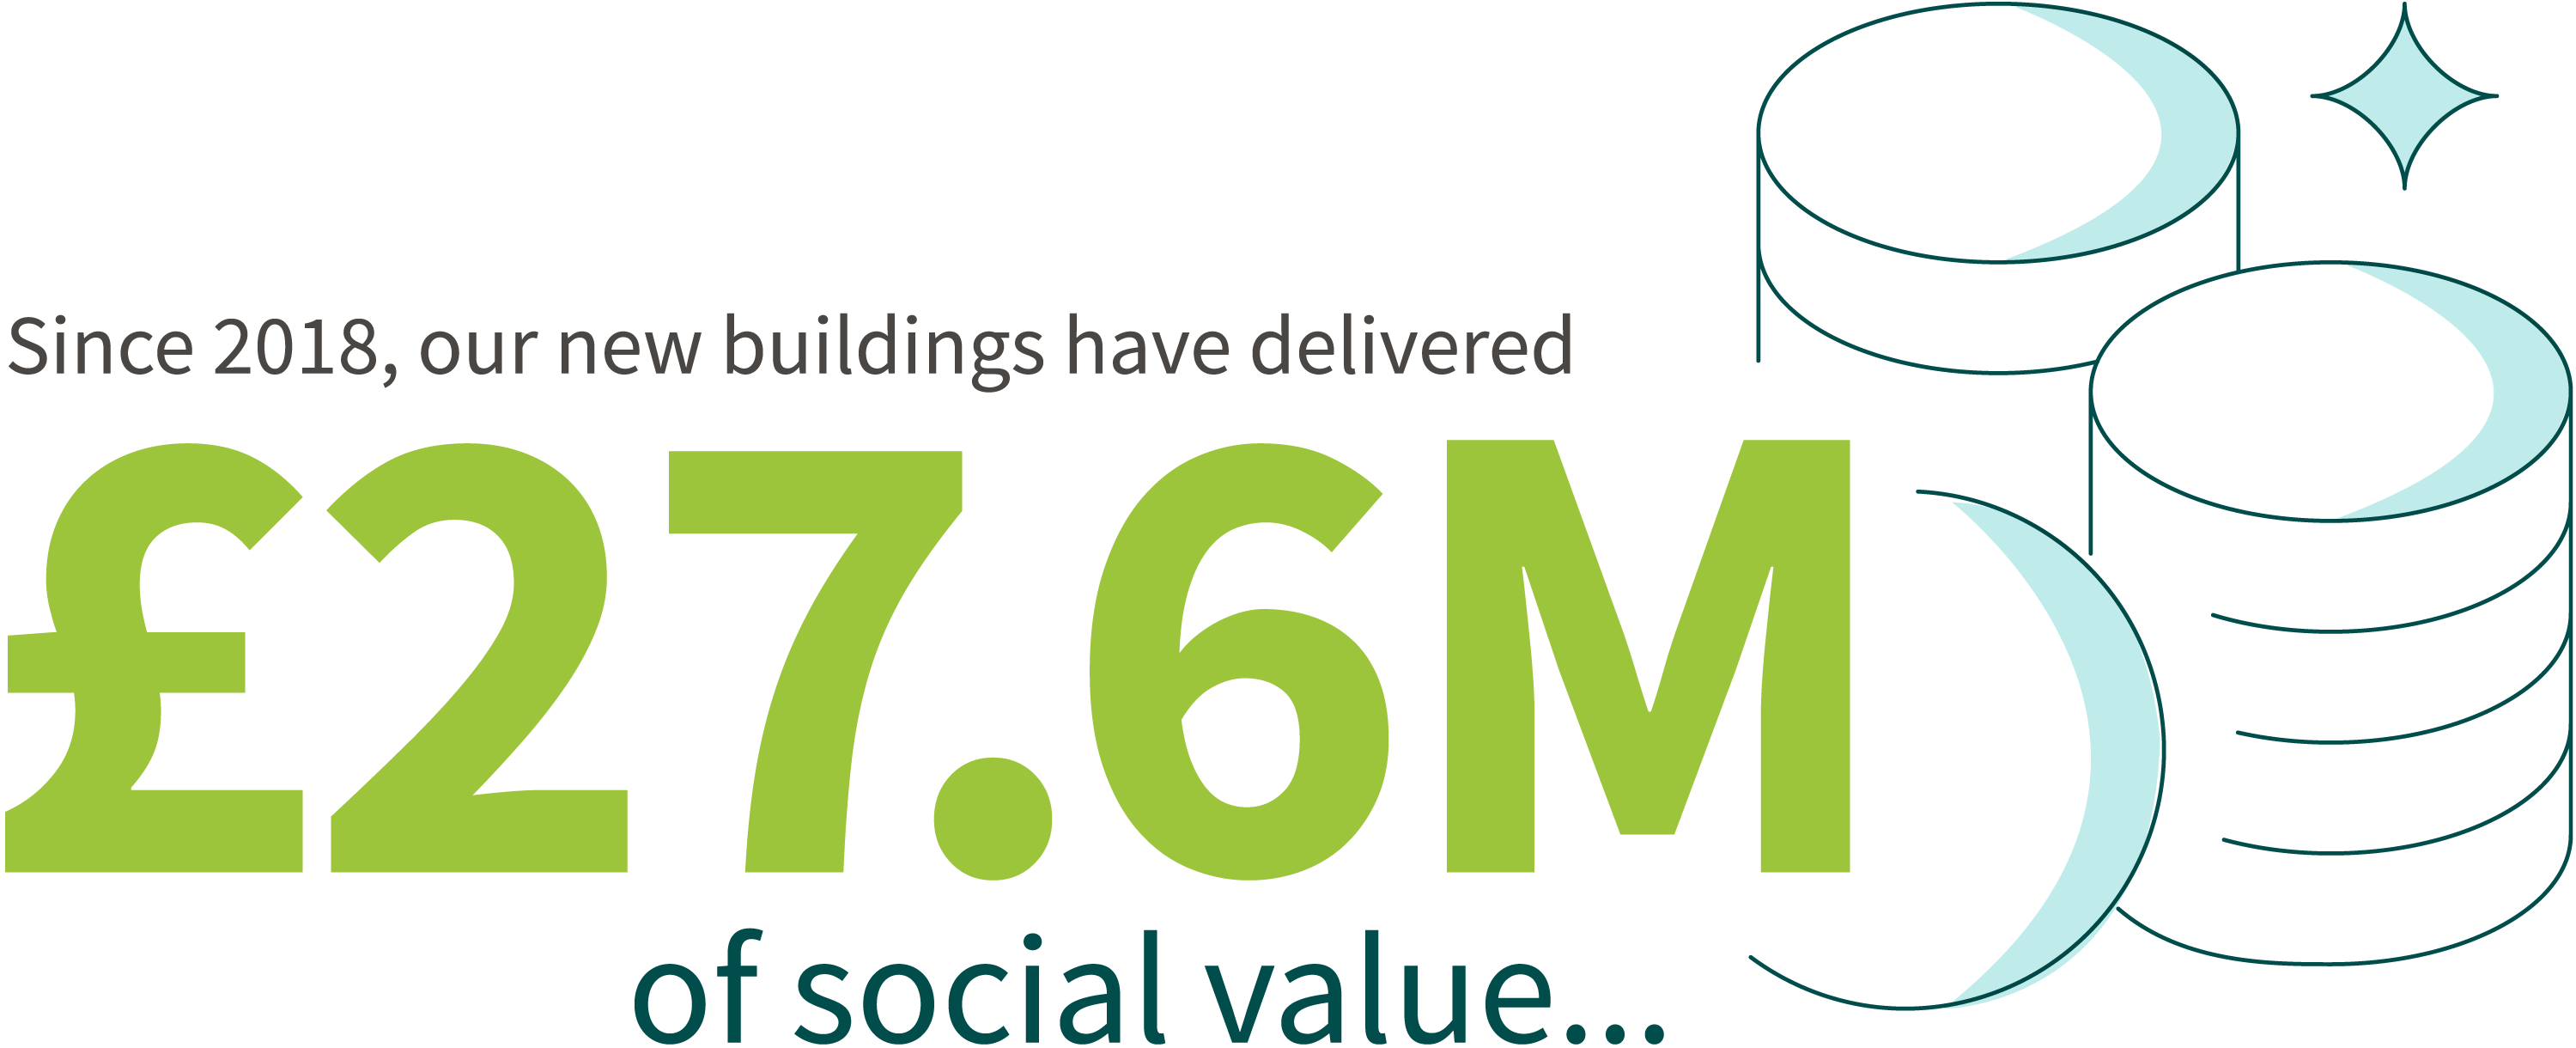 A graphic showing statistic of £27.6M of social value